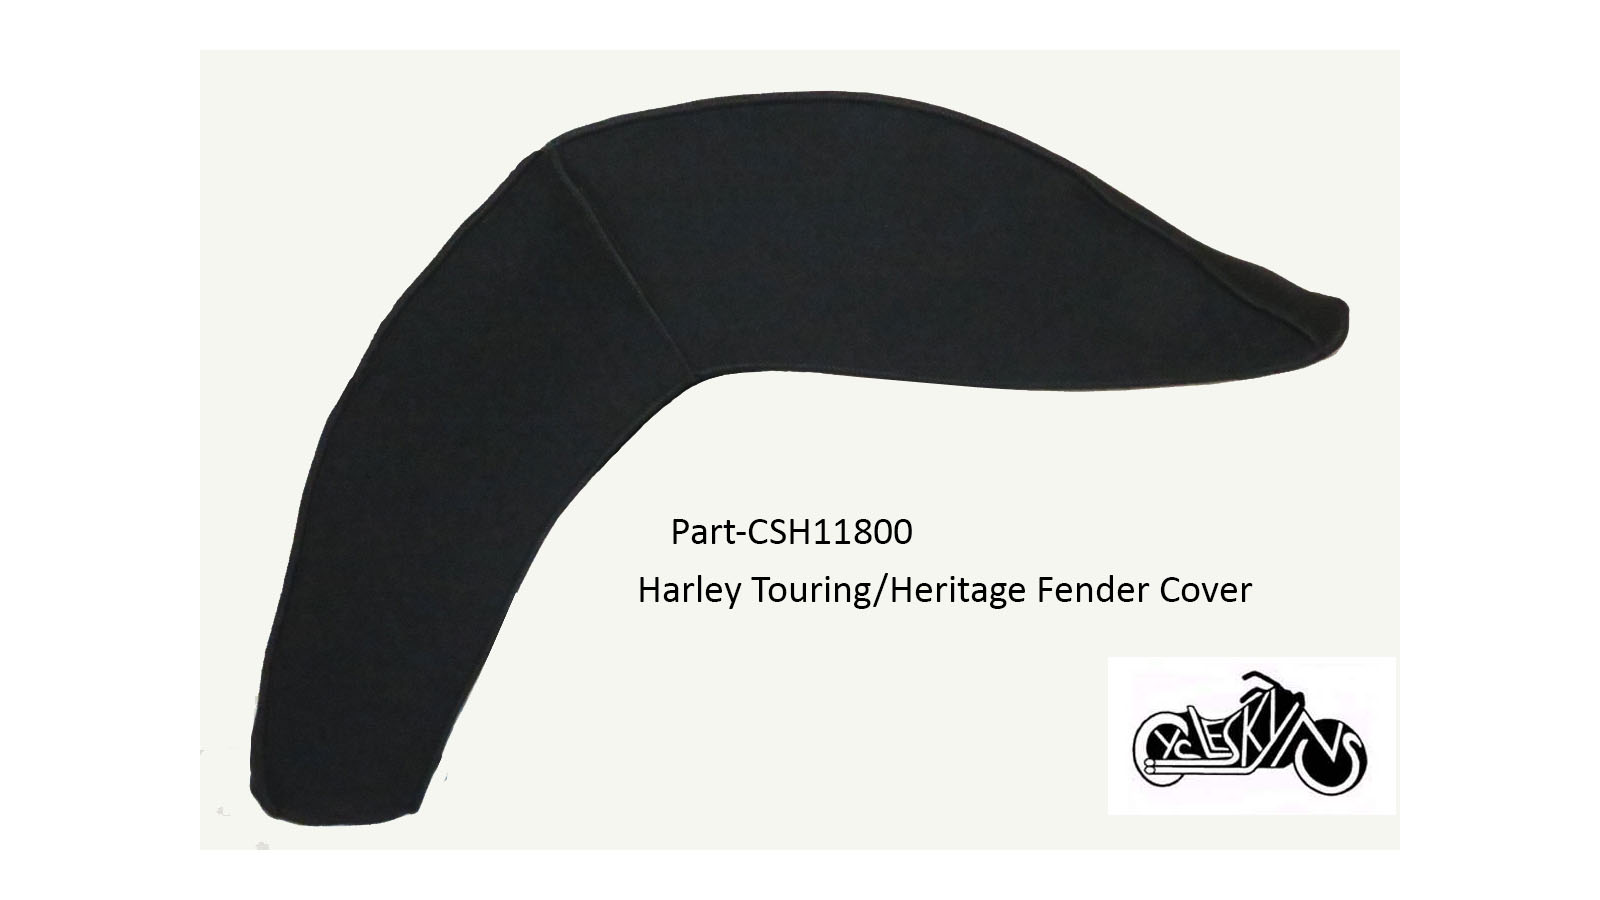 Neoprene Protective mechanic's Cover designed for the Heritage or Touring style Harley Davidson Fender.